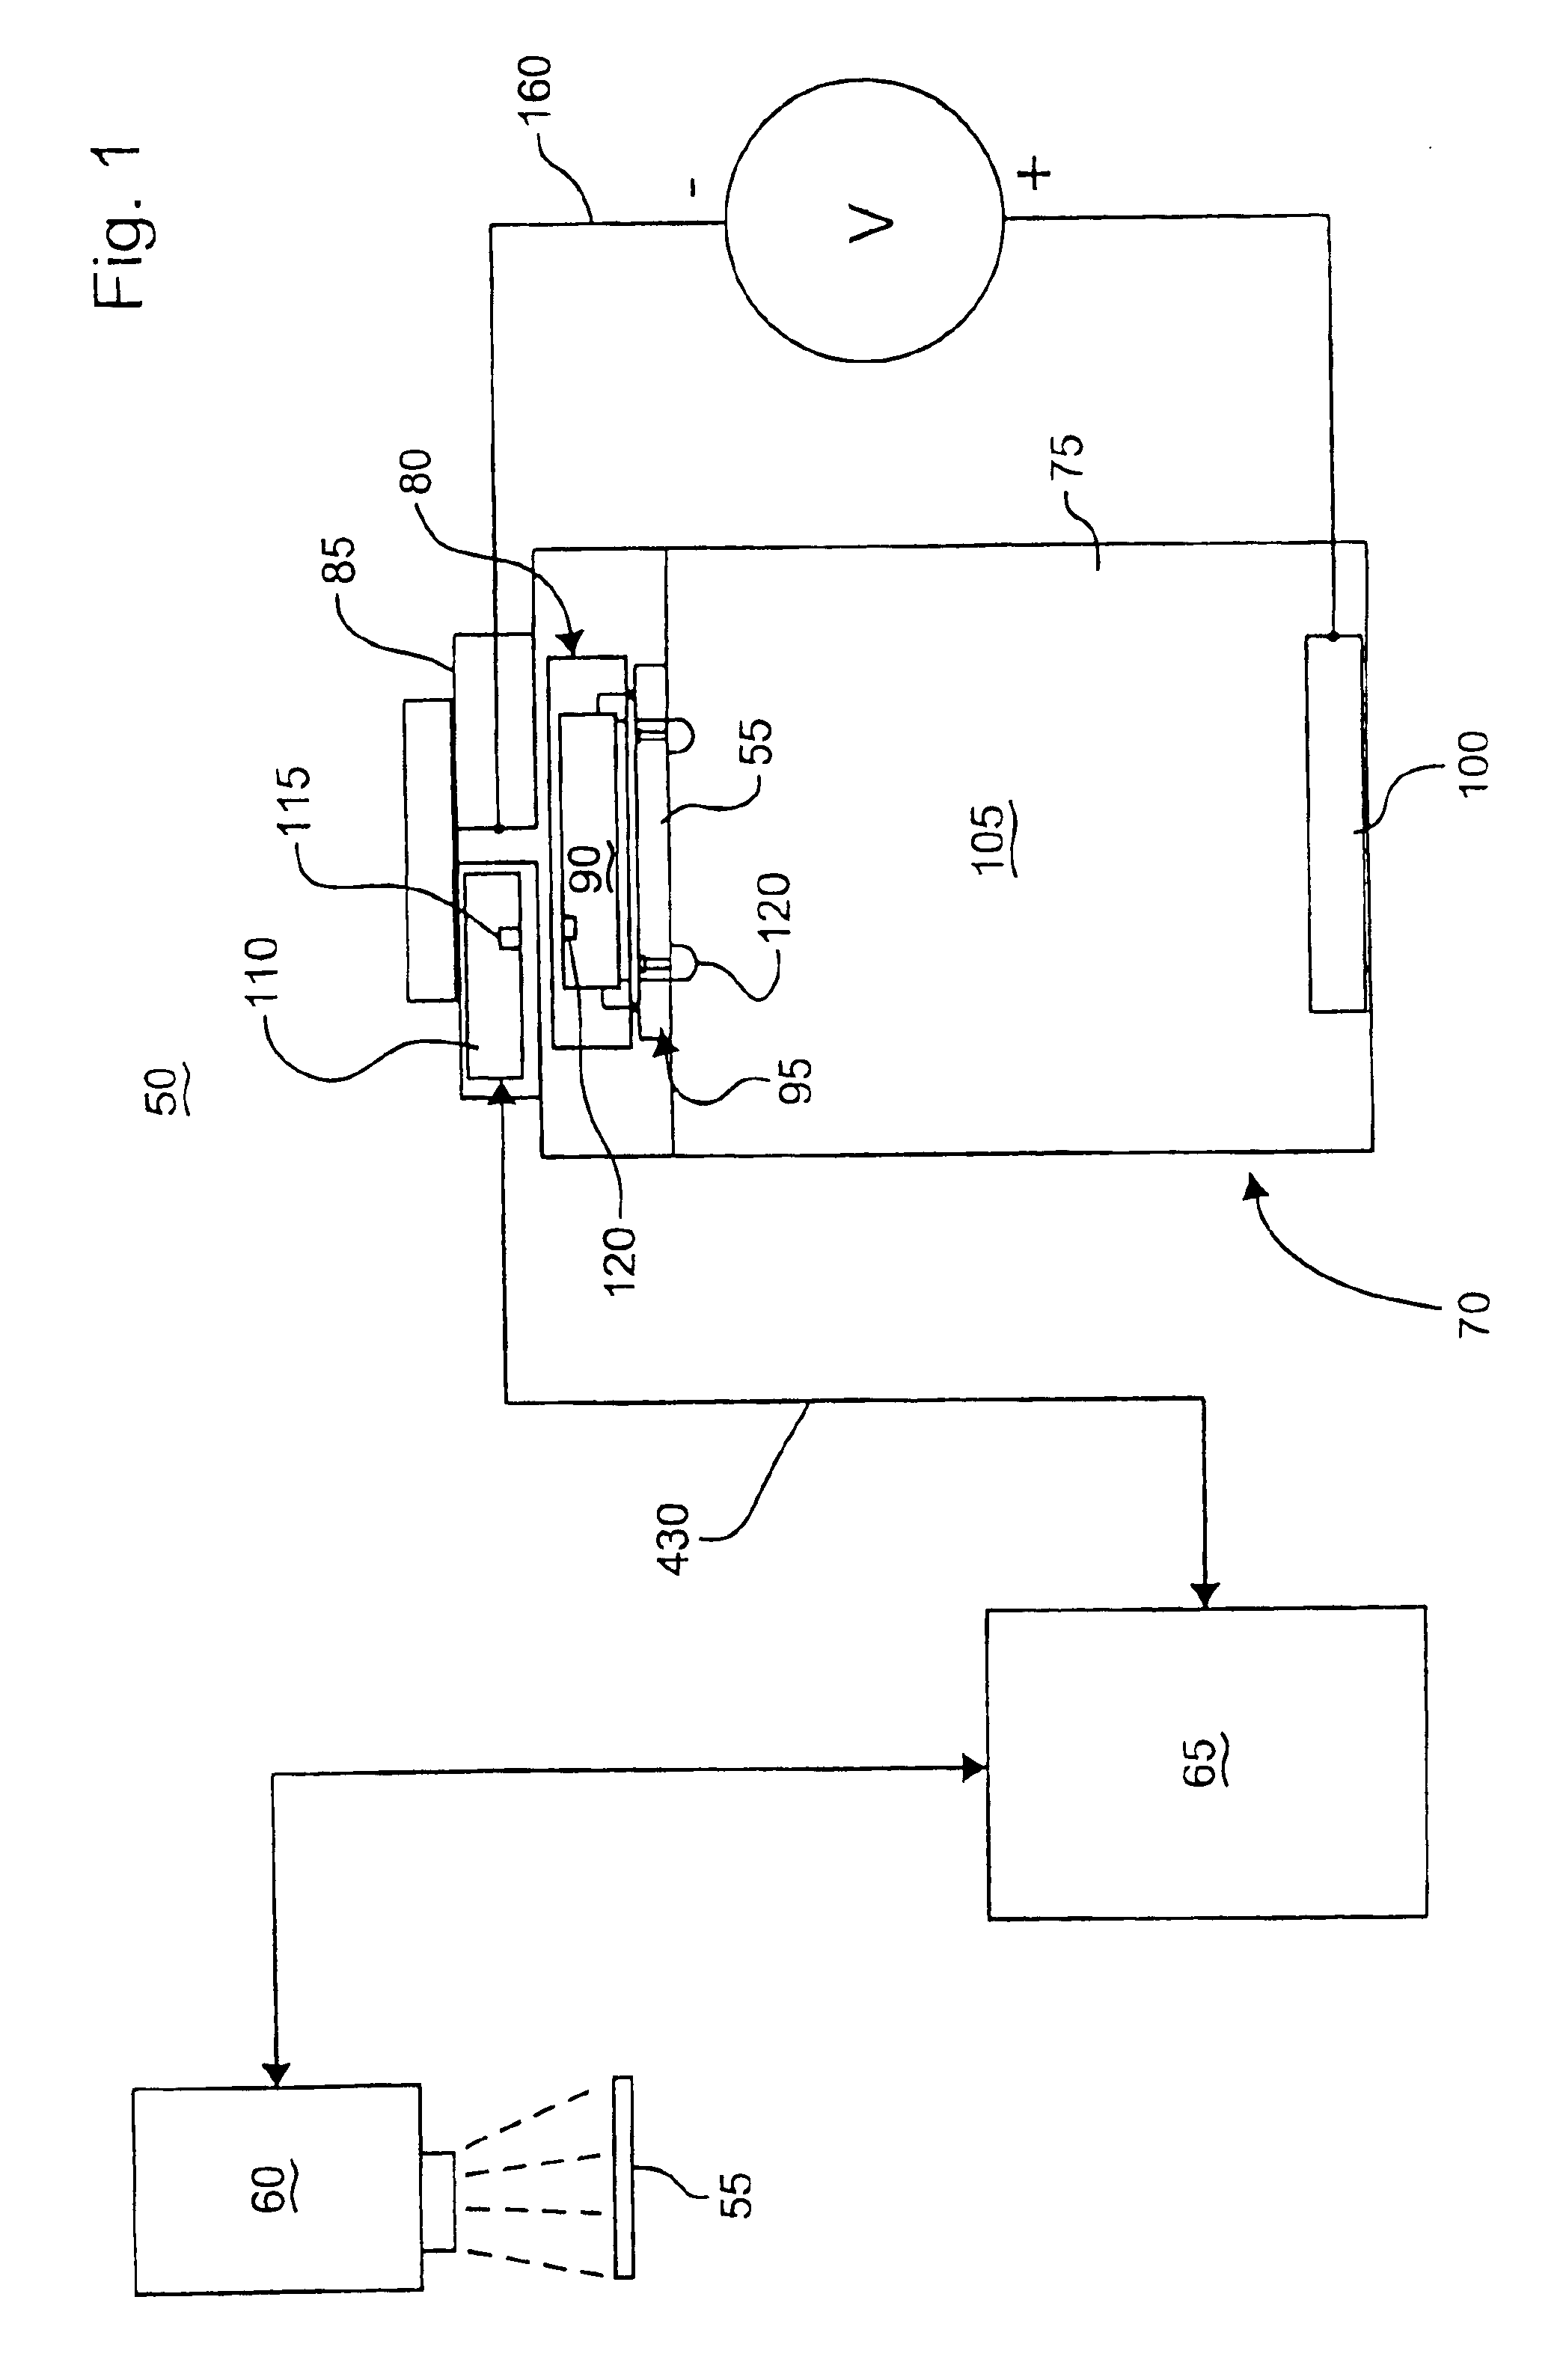 Cathode current control system for a wafer electroplating apparatus